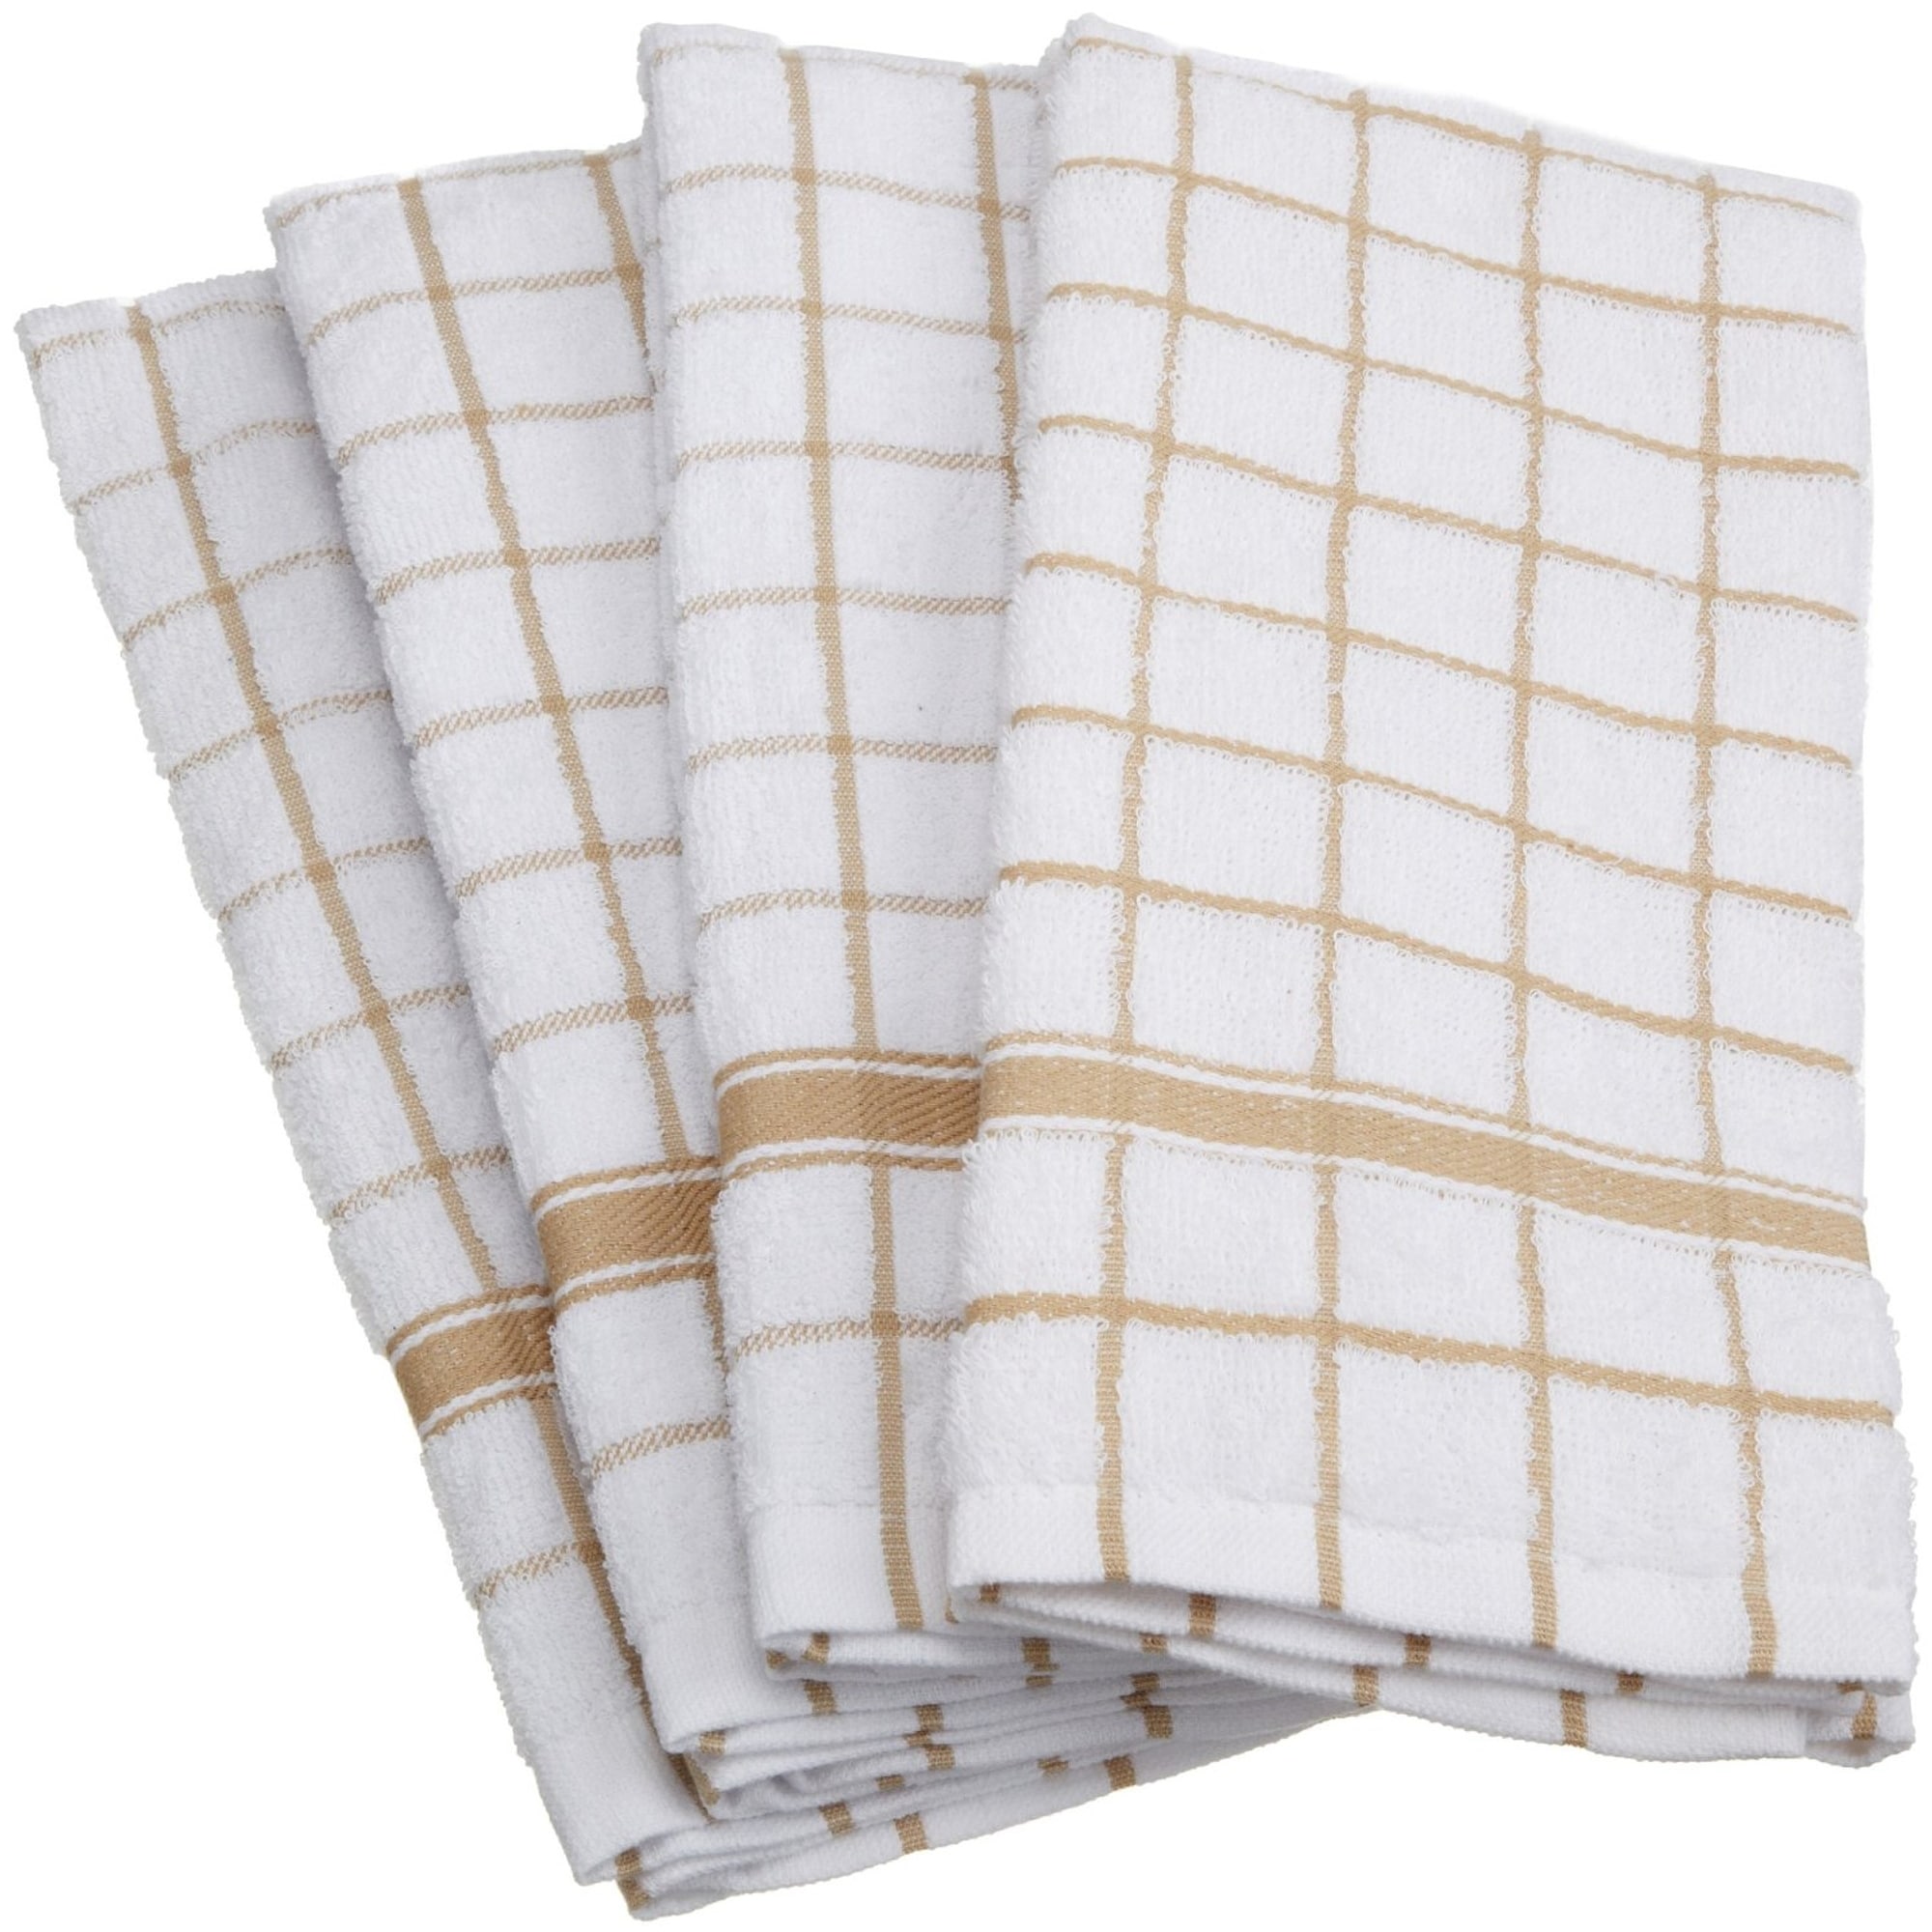 Kitchen Dish Hand Towels Windowpane Brand New Solid Tan Brown Color- Set of  2!